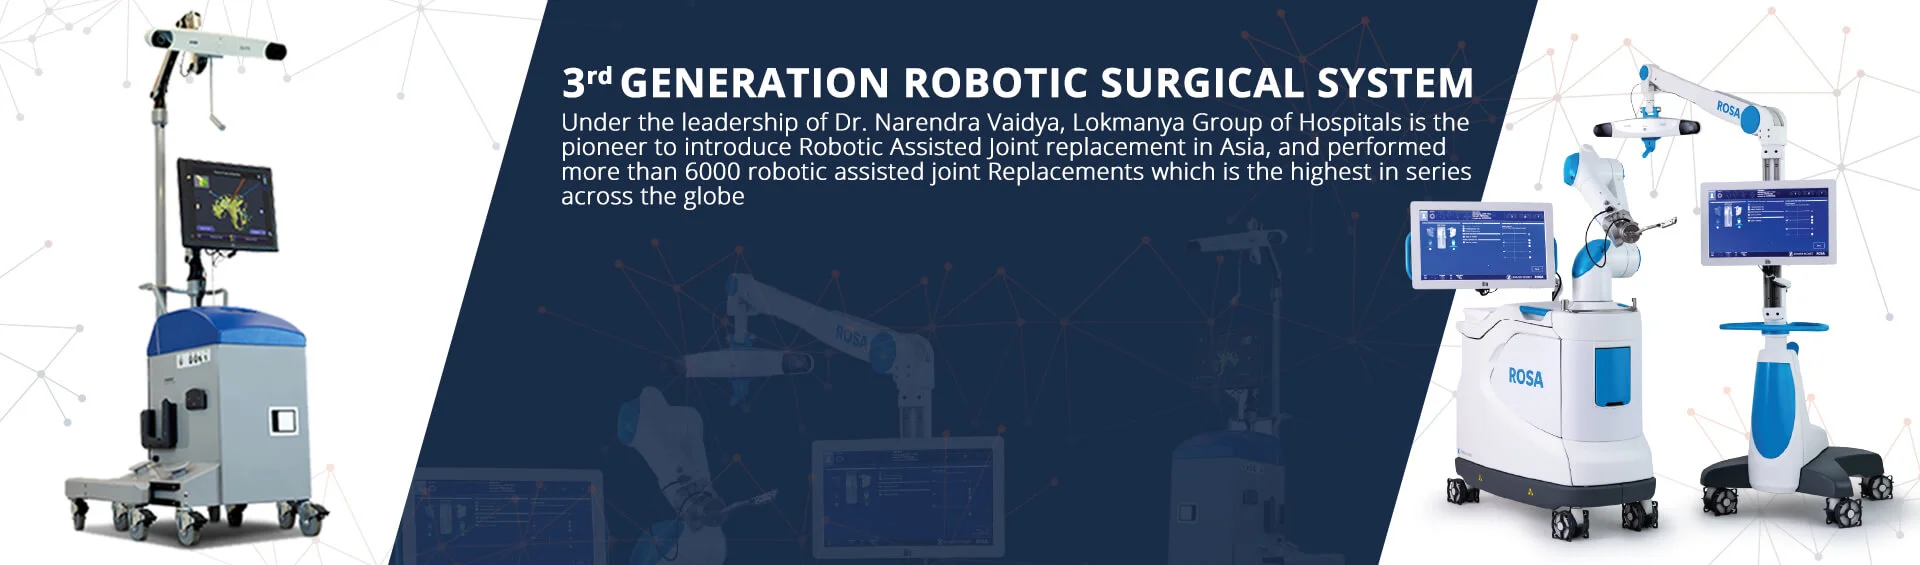 3rd Generation Robotic Surgical system, joints replacement doctor near me, joint replacement surgery in Pune